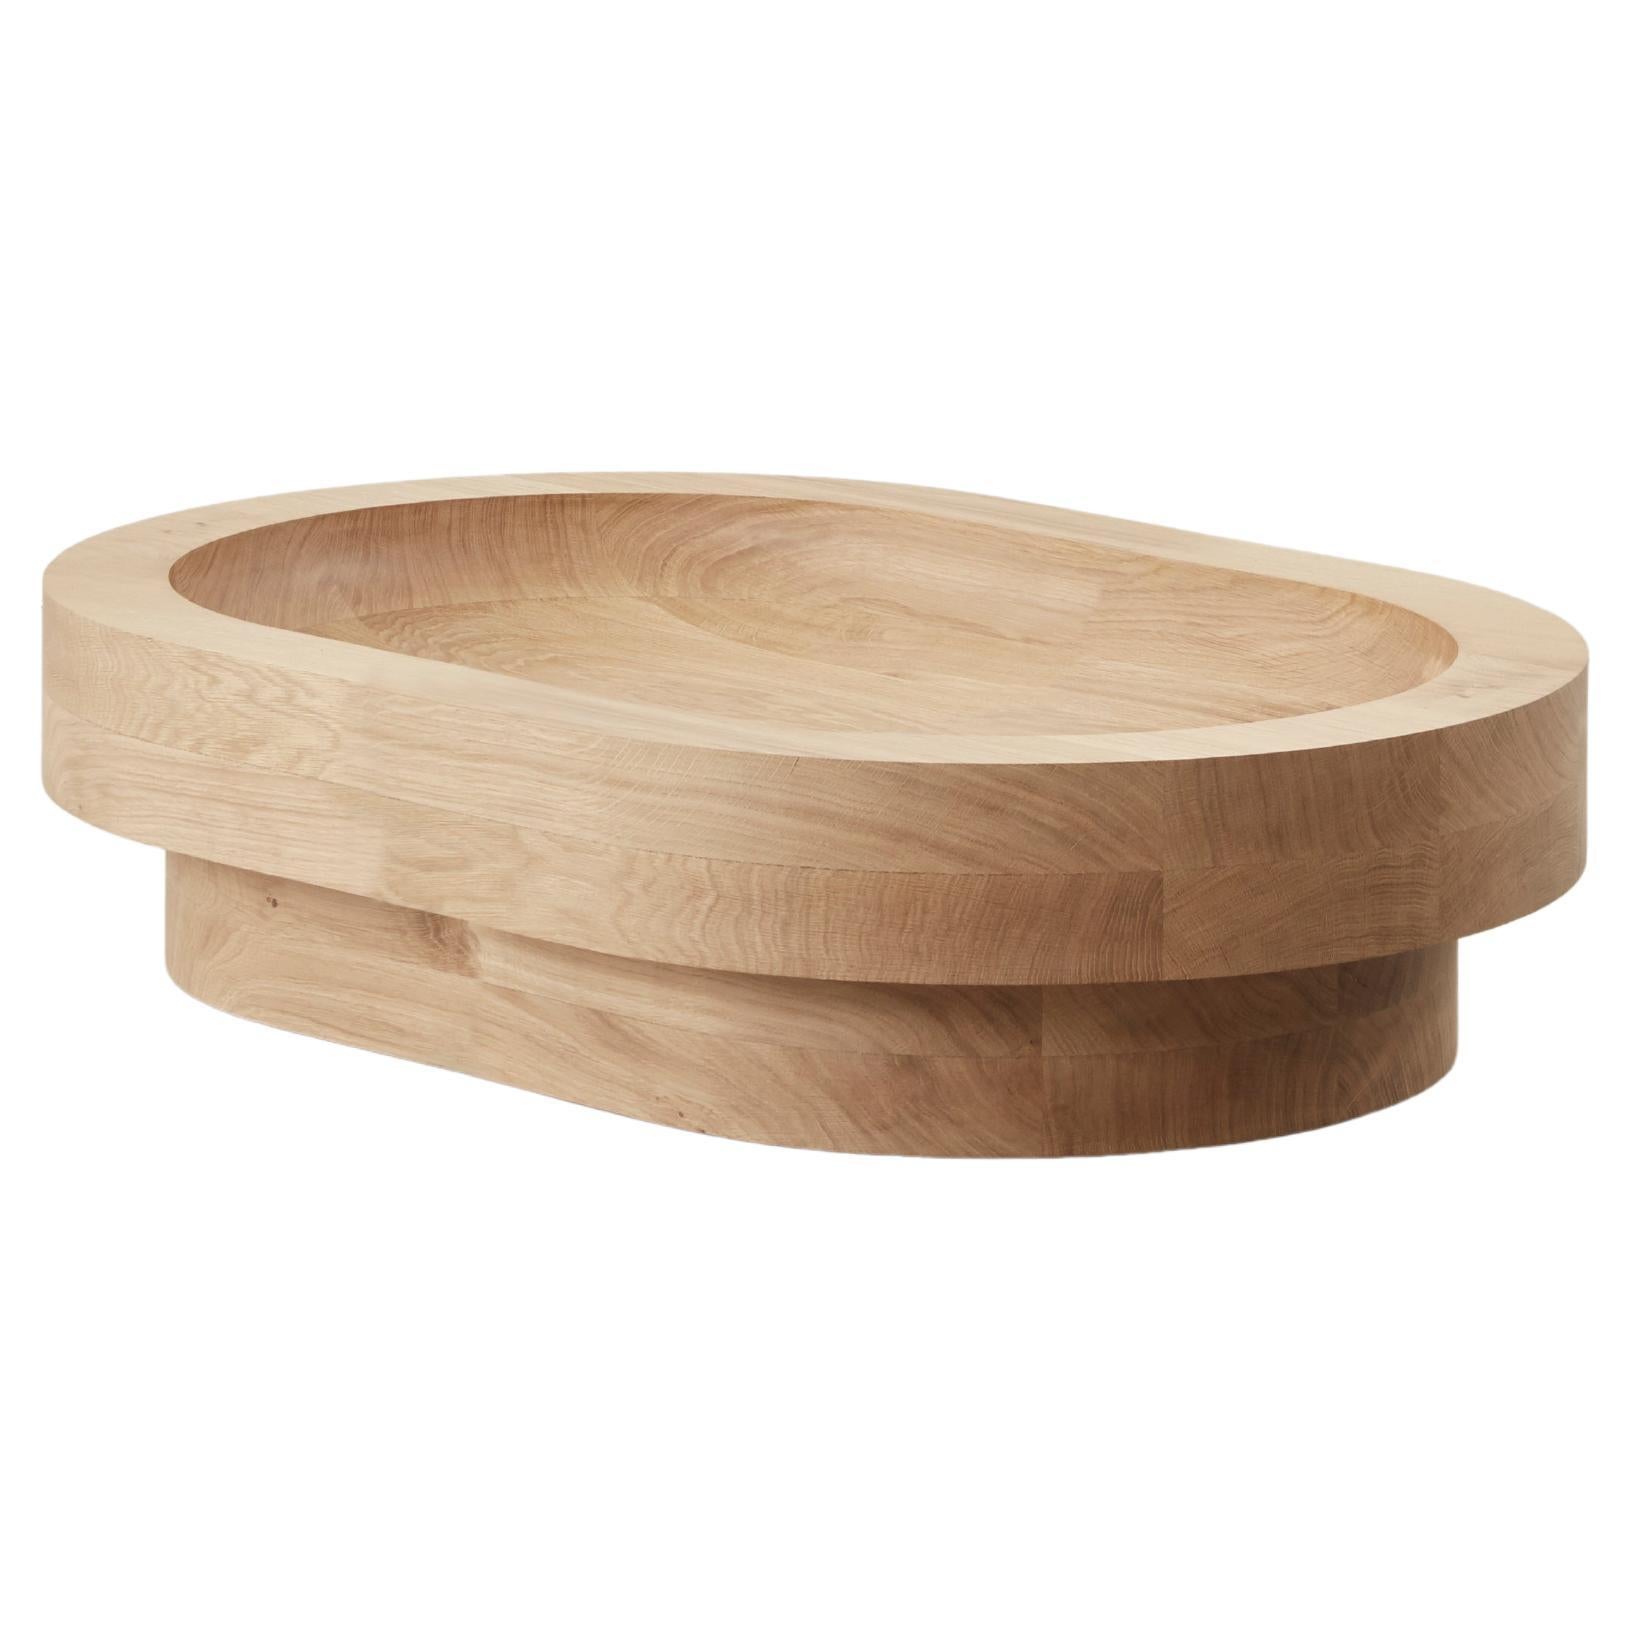 Benni Allan 'Low Table Two' in oak by EBBA, UK, 2022 For Sale